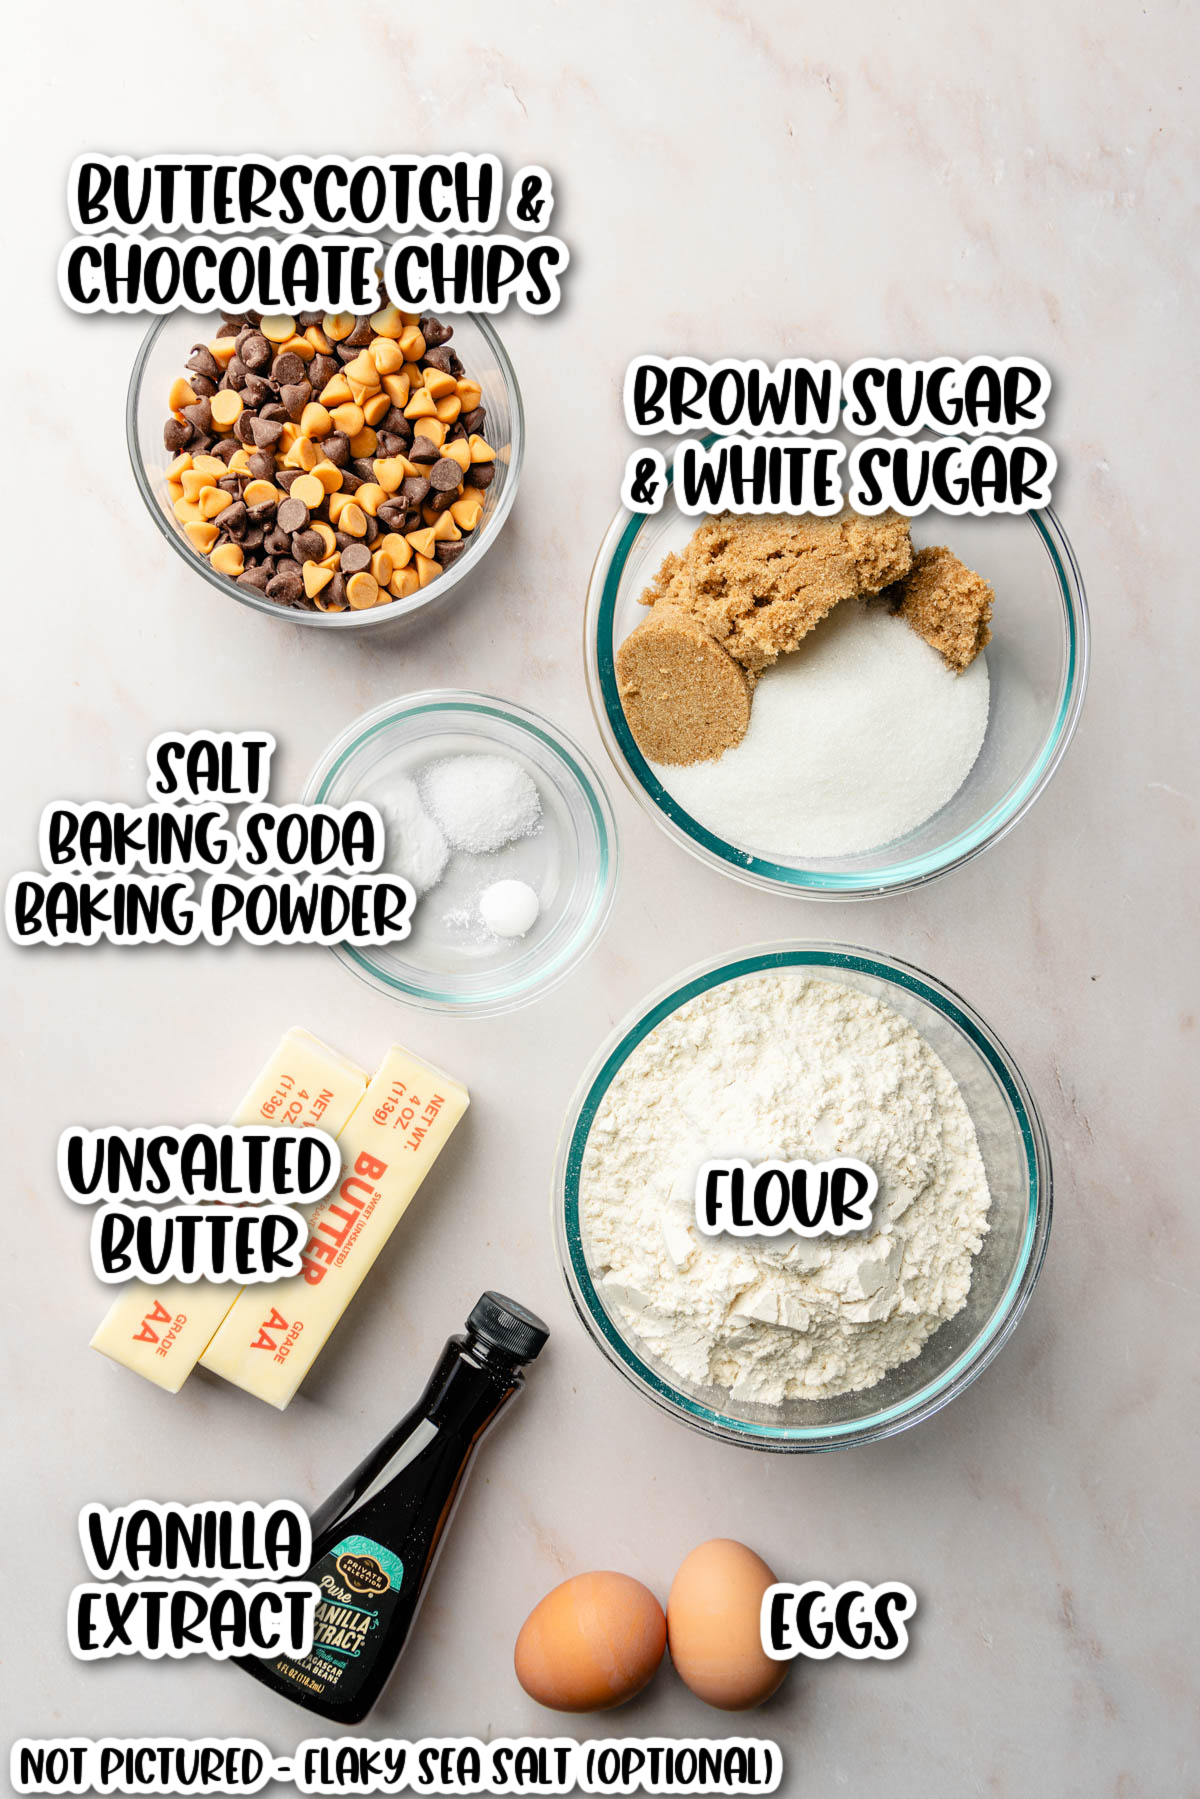 Ingredients for chocolate chip butterscotch cookies